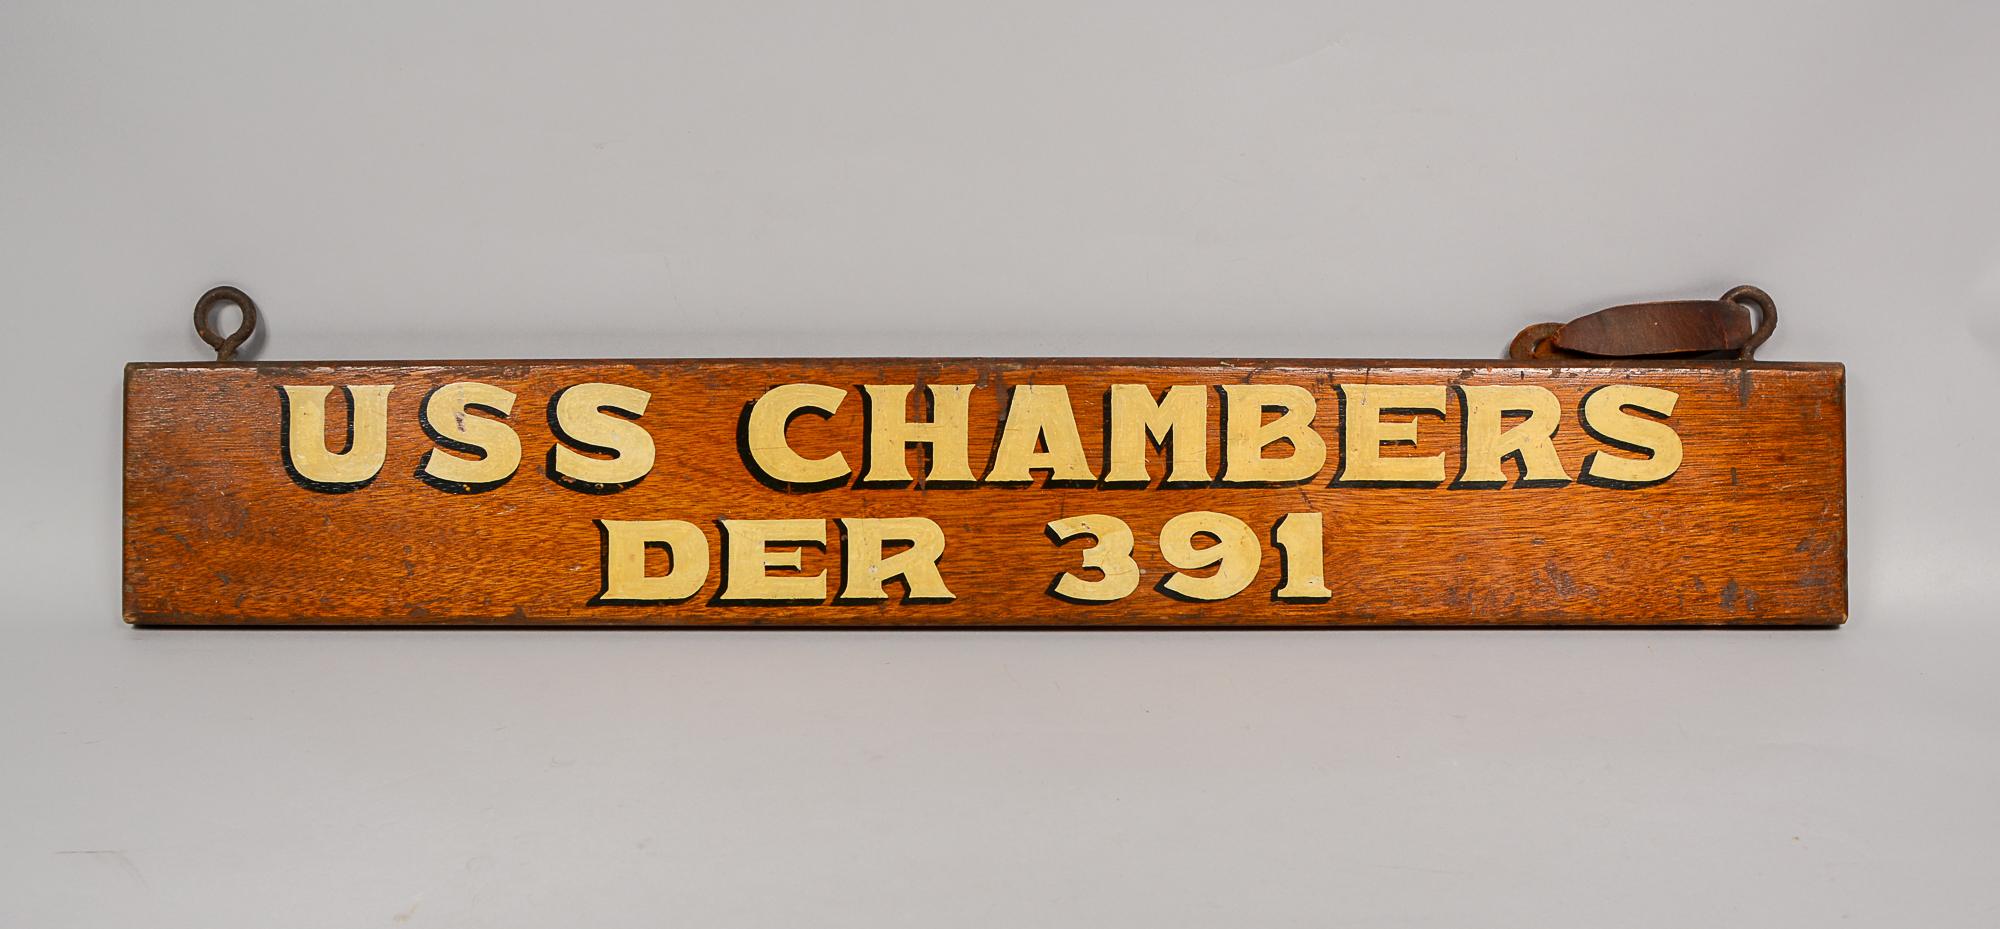 Ship name board for the USS Chambers DER 391. The Chambers was a Edsall-class destroyer escort. The ship was in service with the United States Navy from 1943 to 1946 and from 1955 to 1960. From 1952 to 1954, she was loaned to the United States Coast